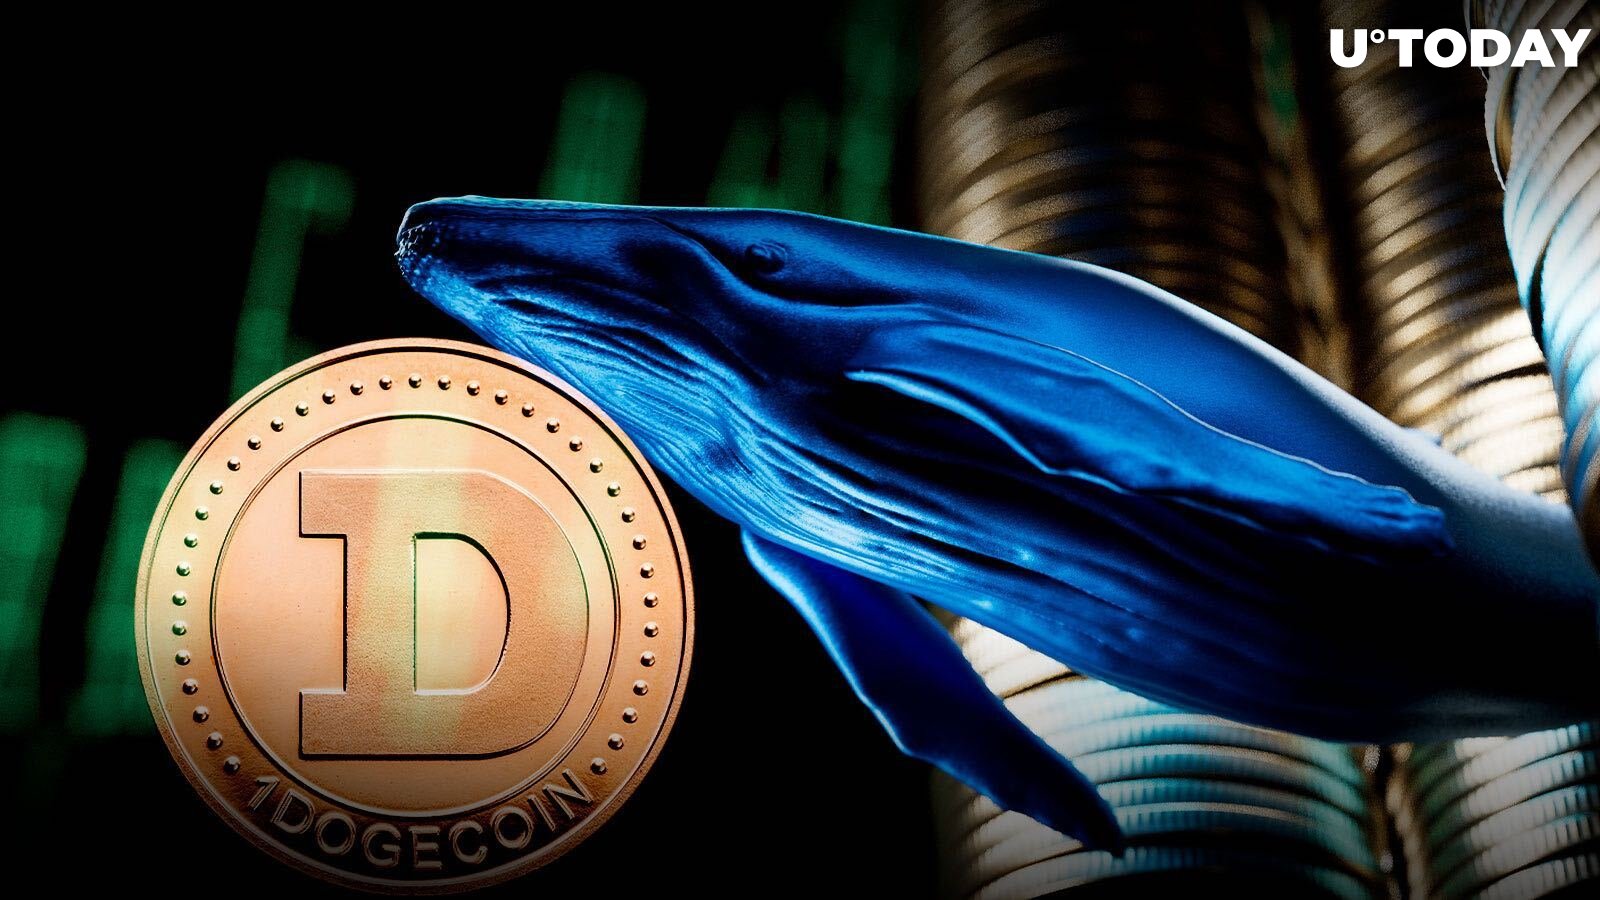 Dogecoin Catches Whales' Interest, DOGE Is in Top 10 by Trading Volume